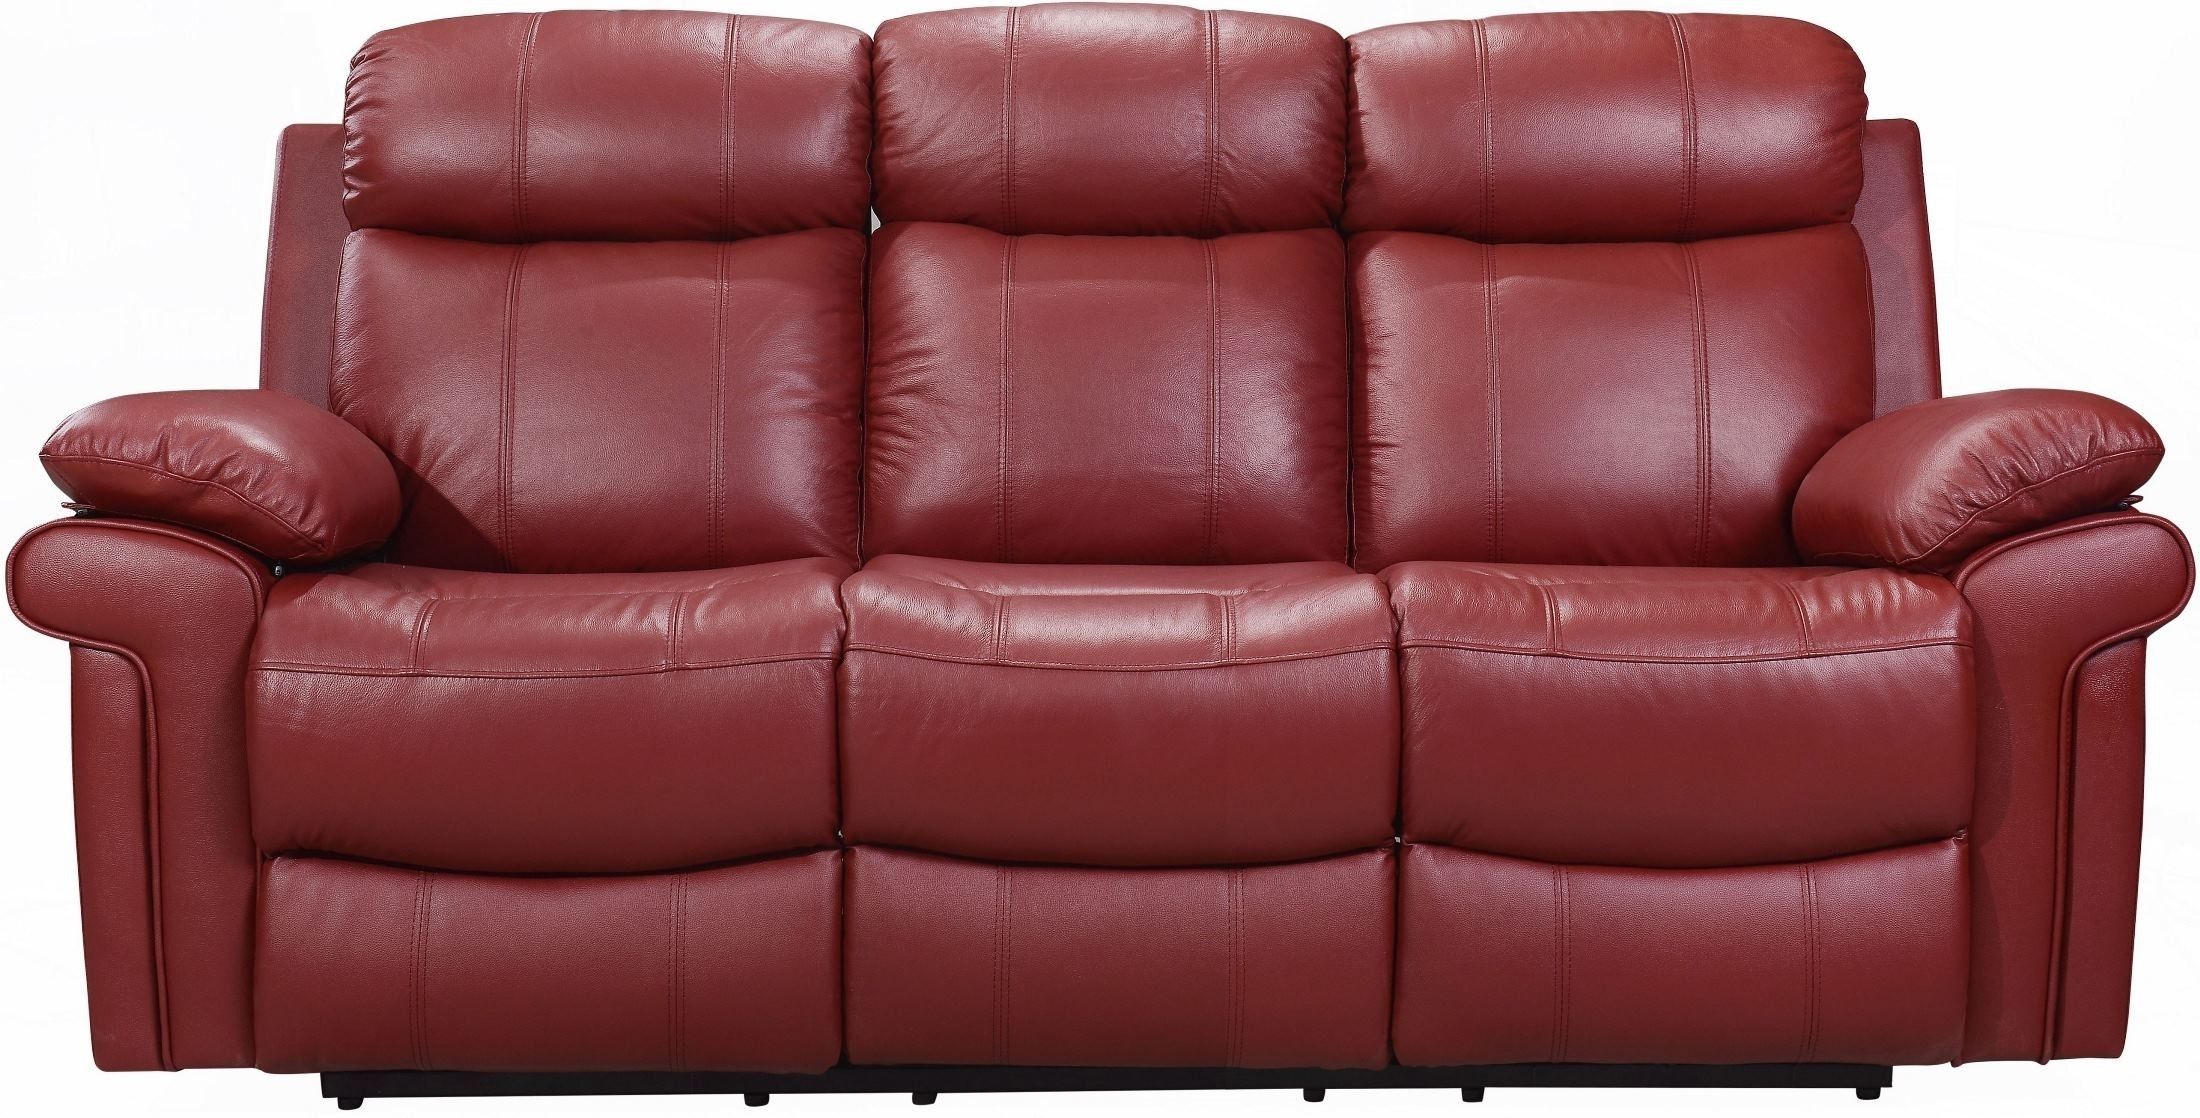 Red Leather Reclining Sofa For Ashley Furniture Remodel 17 Within Red Leather Reclining Sofas And Loveseats (Photo 10 of 15)